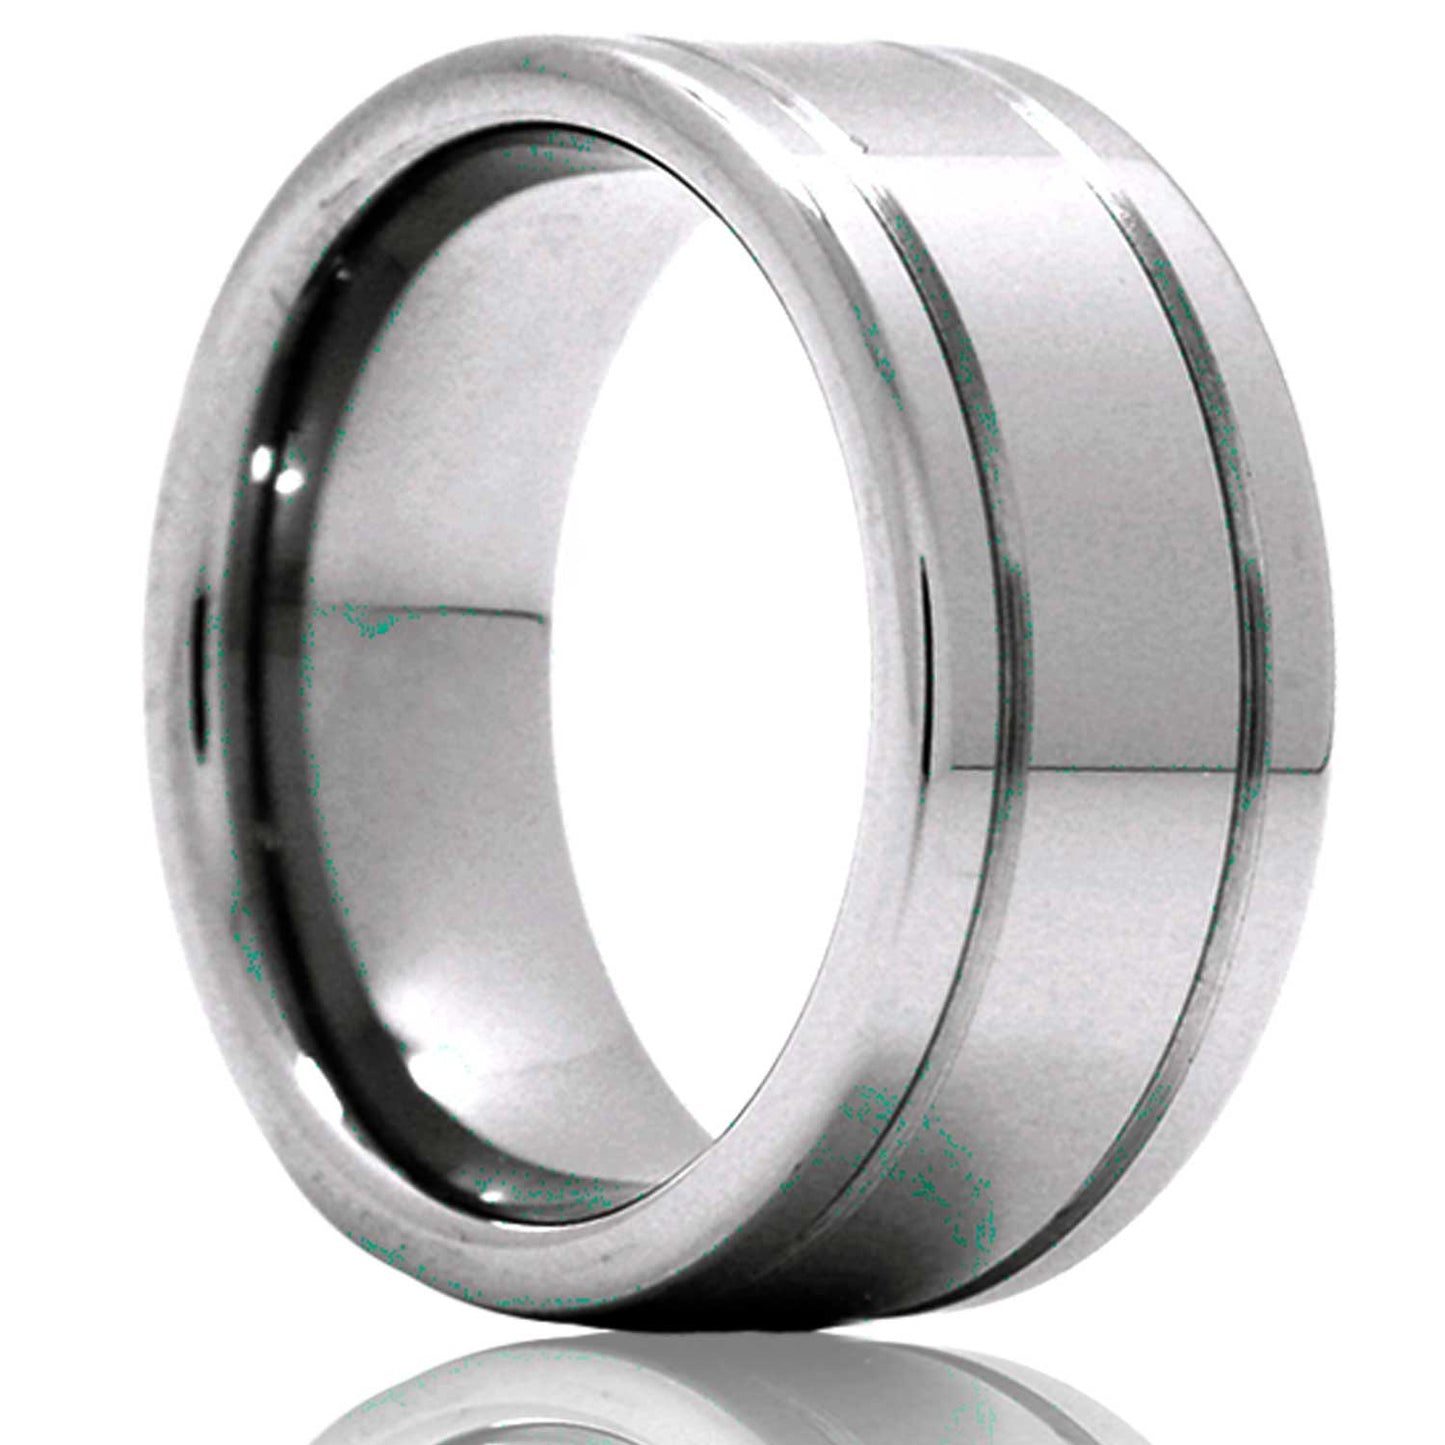 A cobalt wedding band with grooved edges displayed on a neutral white background.